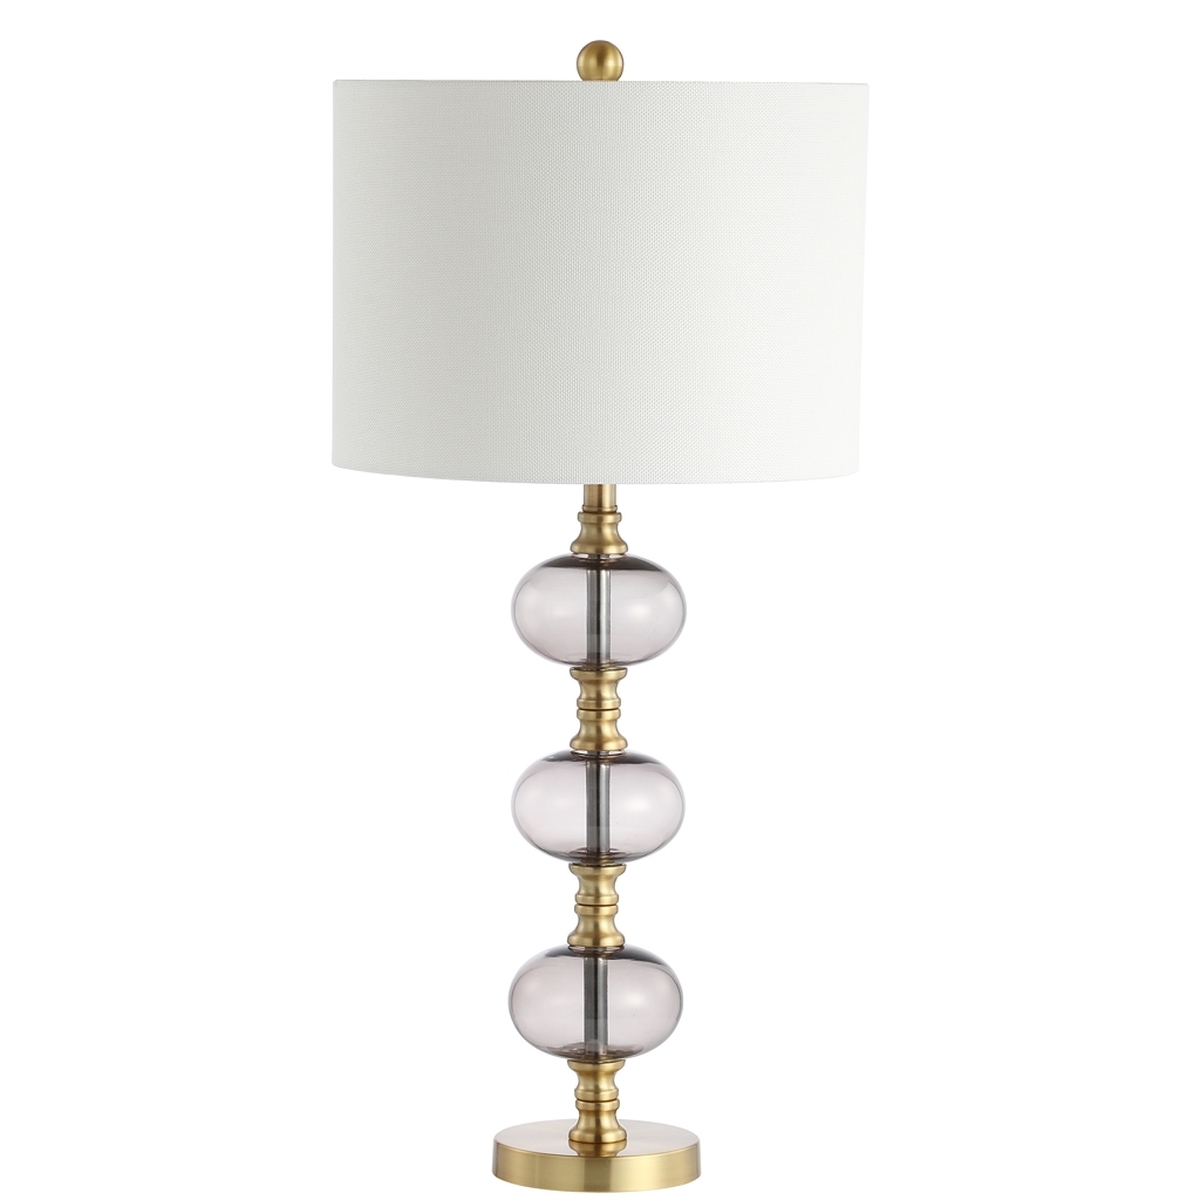 Marcelo Table Lamp - Antique Brass - Arlo Home - Image 1